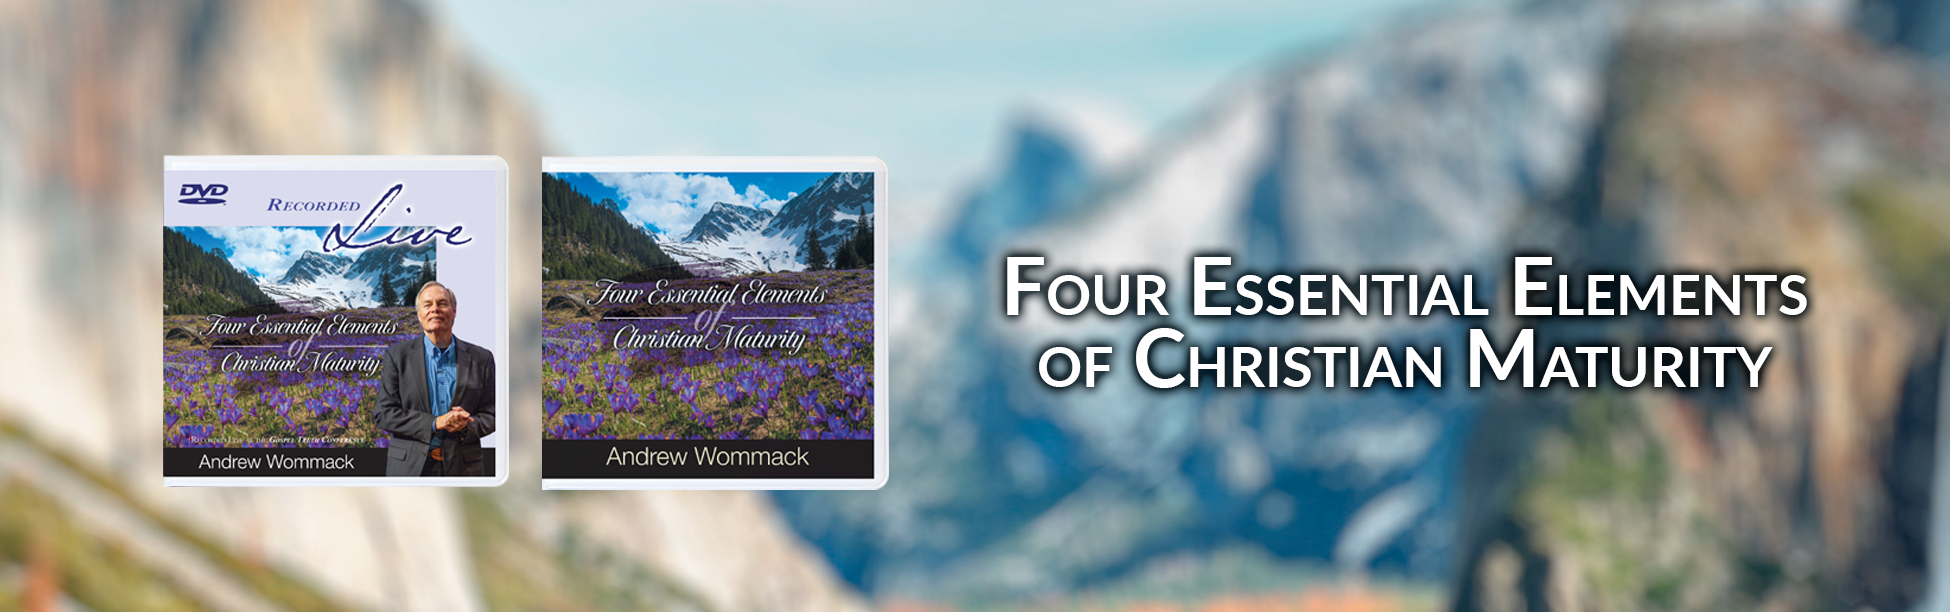 Four_Essential_Elements_of_Christian_Maturity_Top_Banner_1950X612